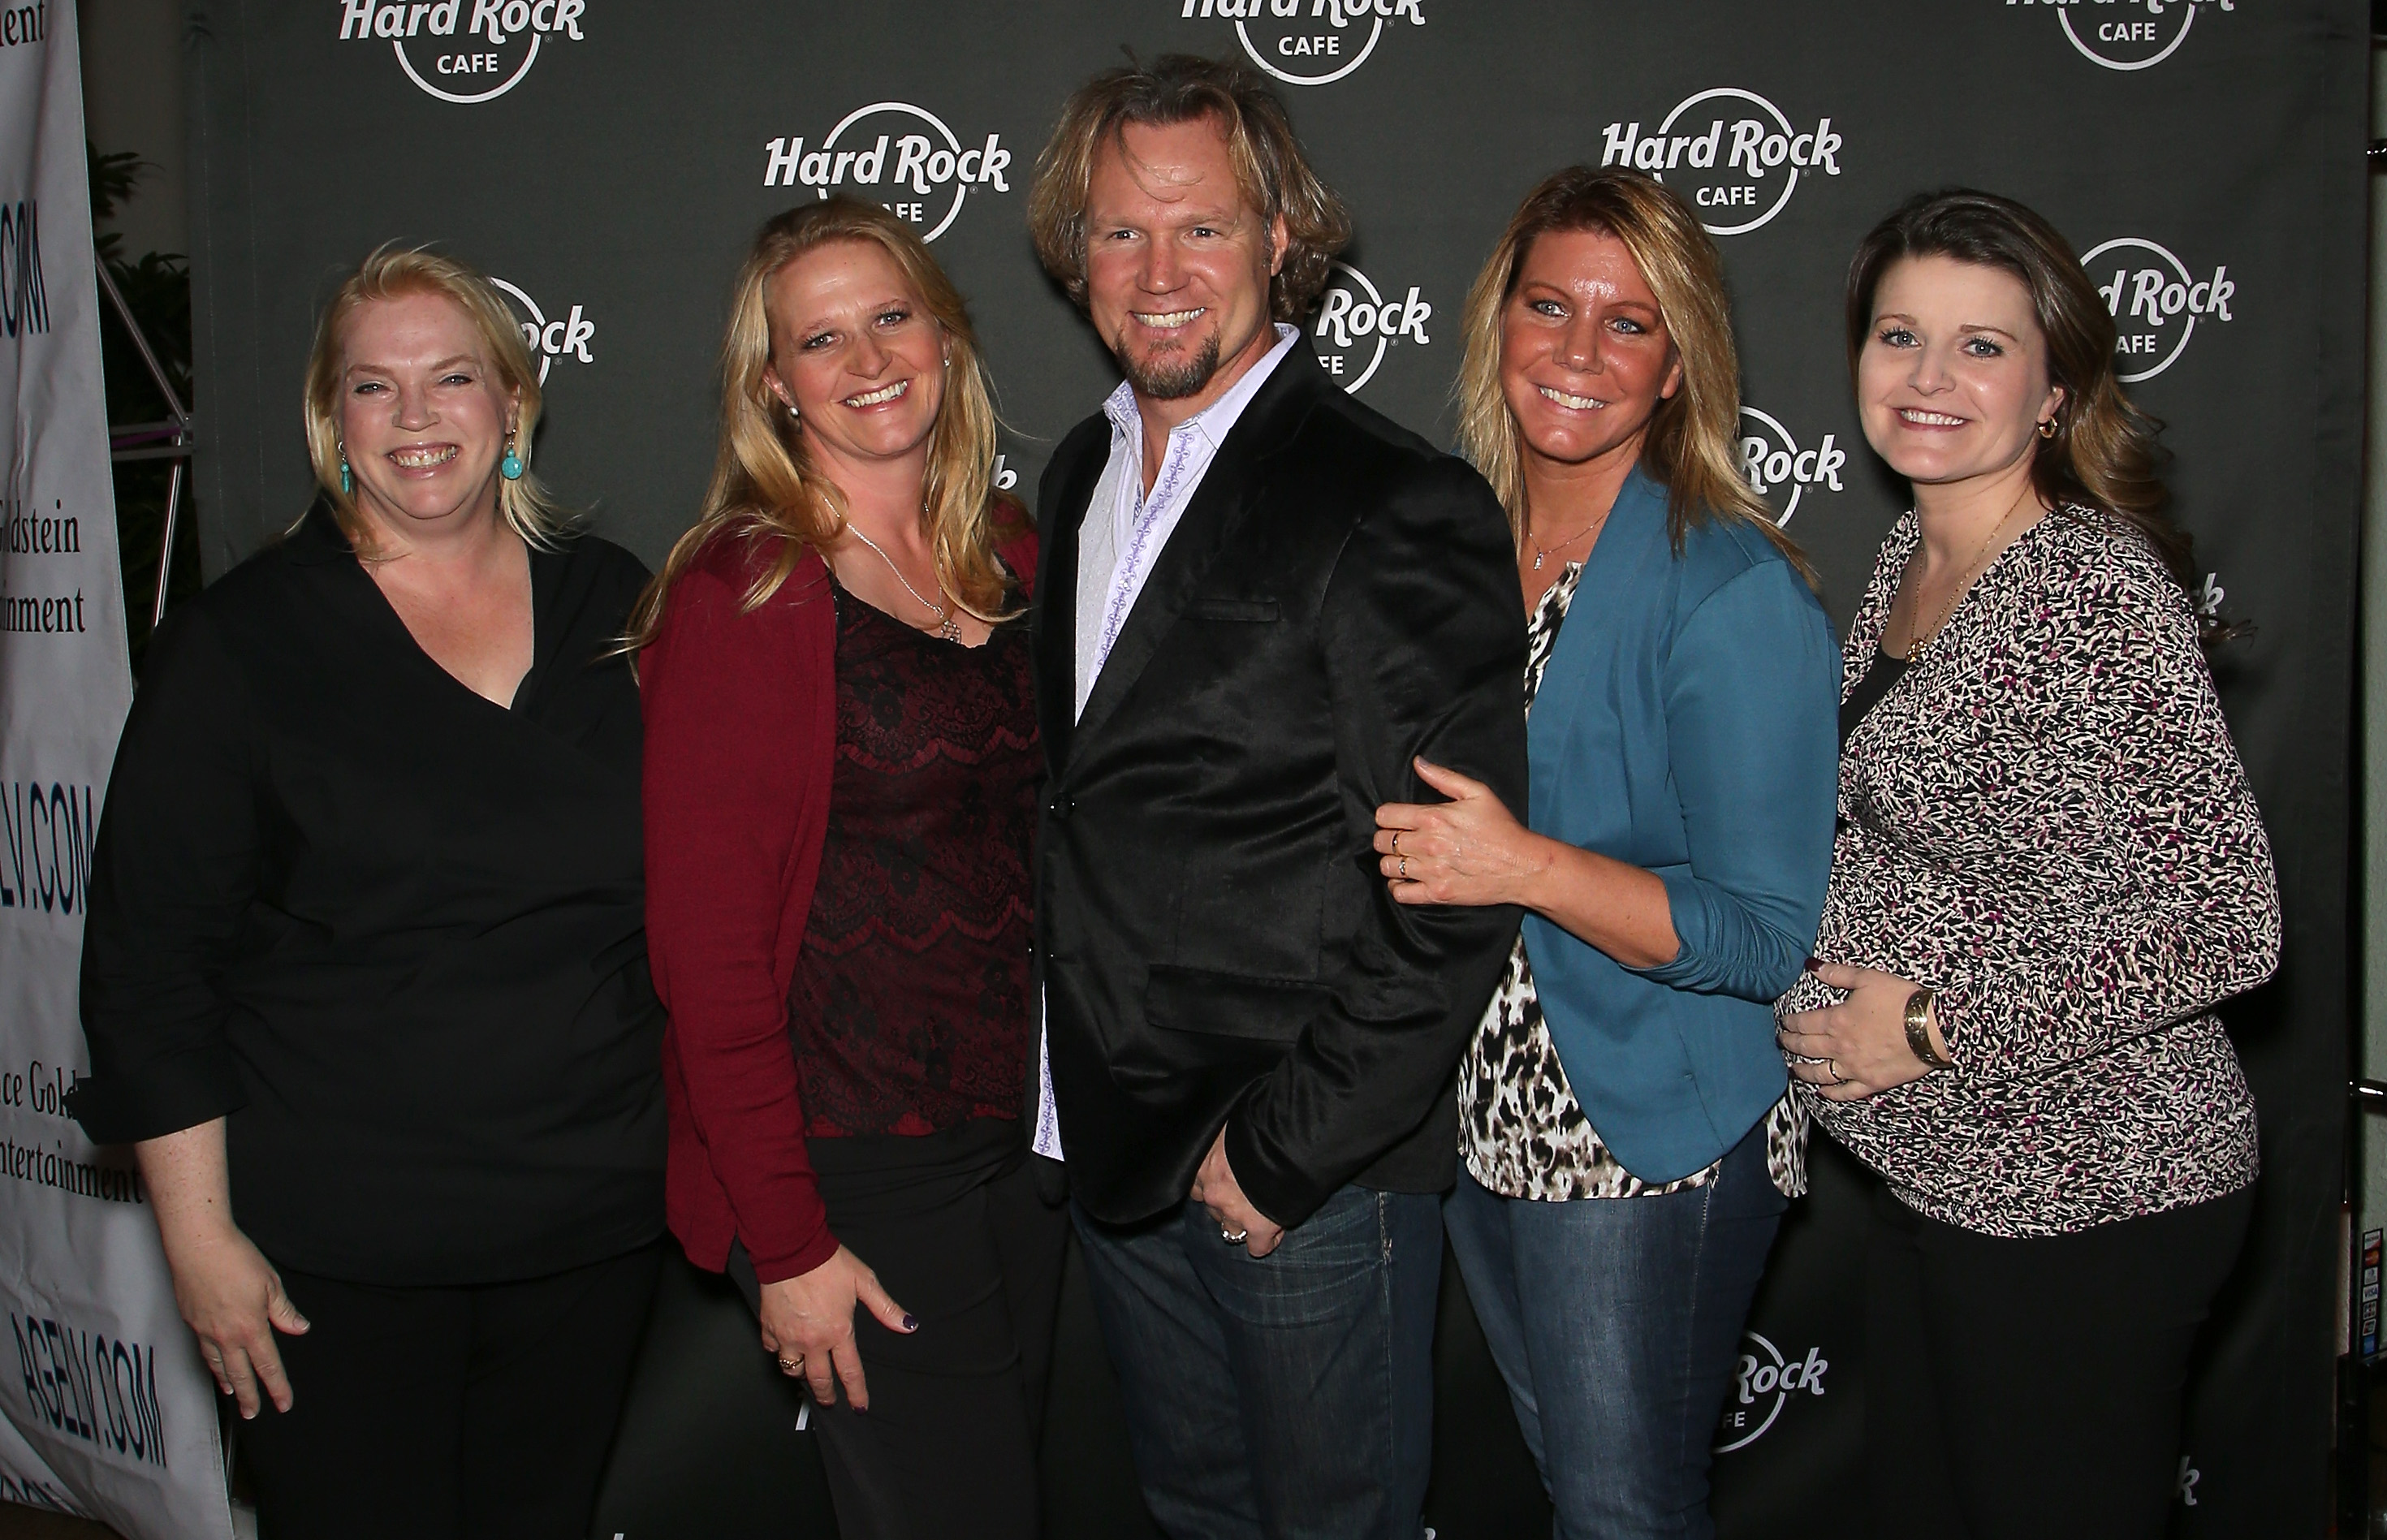 Kody Brown pictured with his sister wives during happier times in October 2015